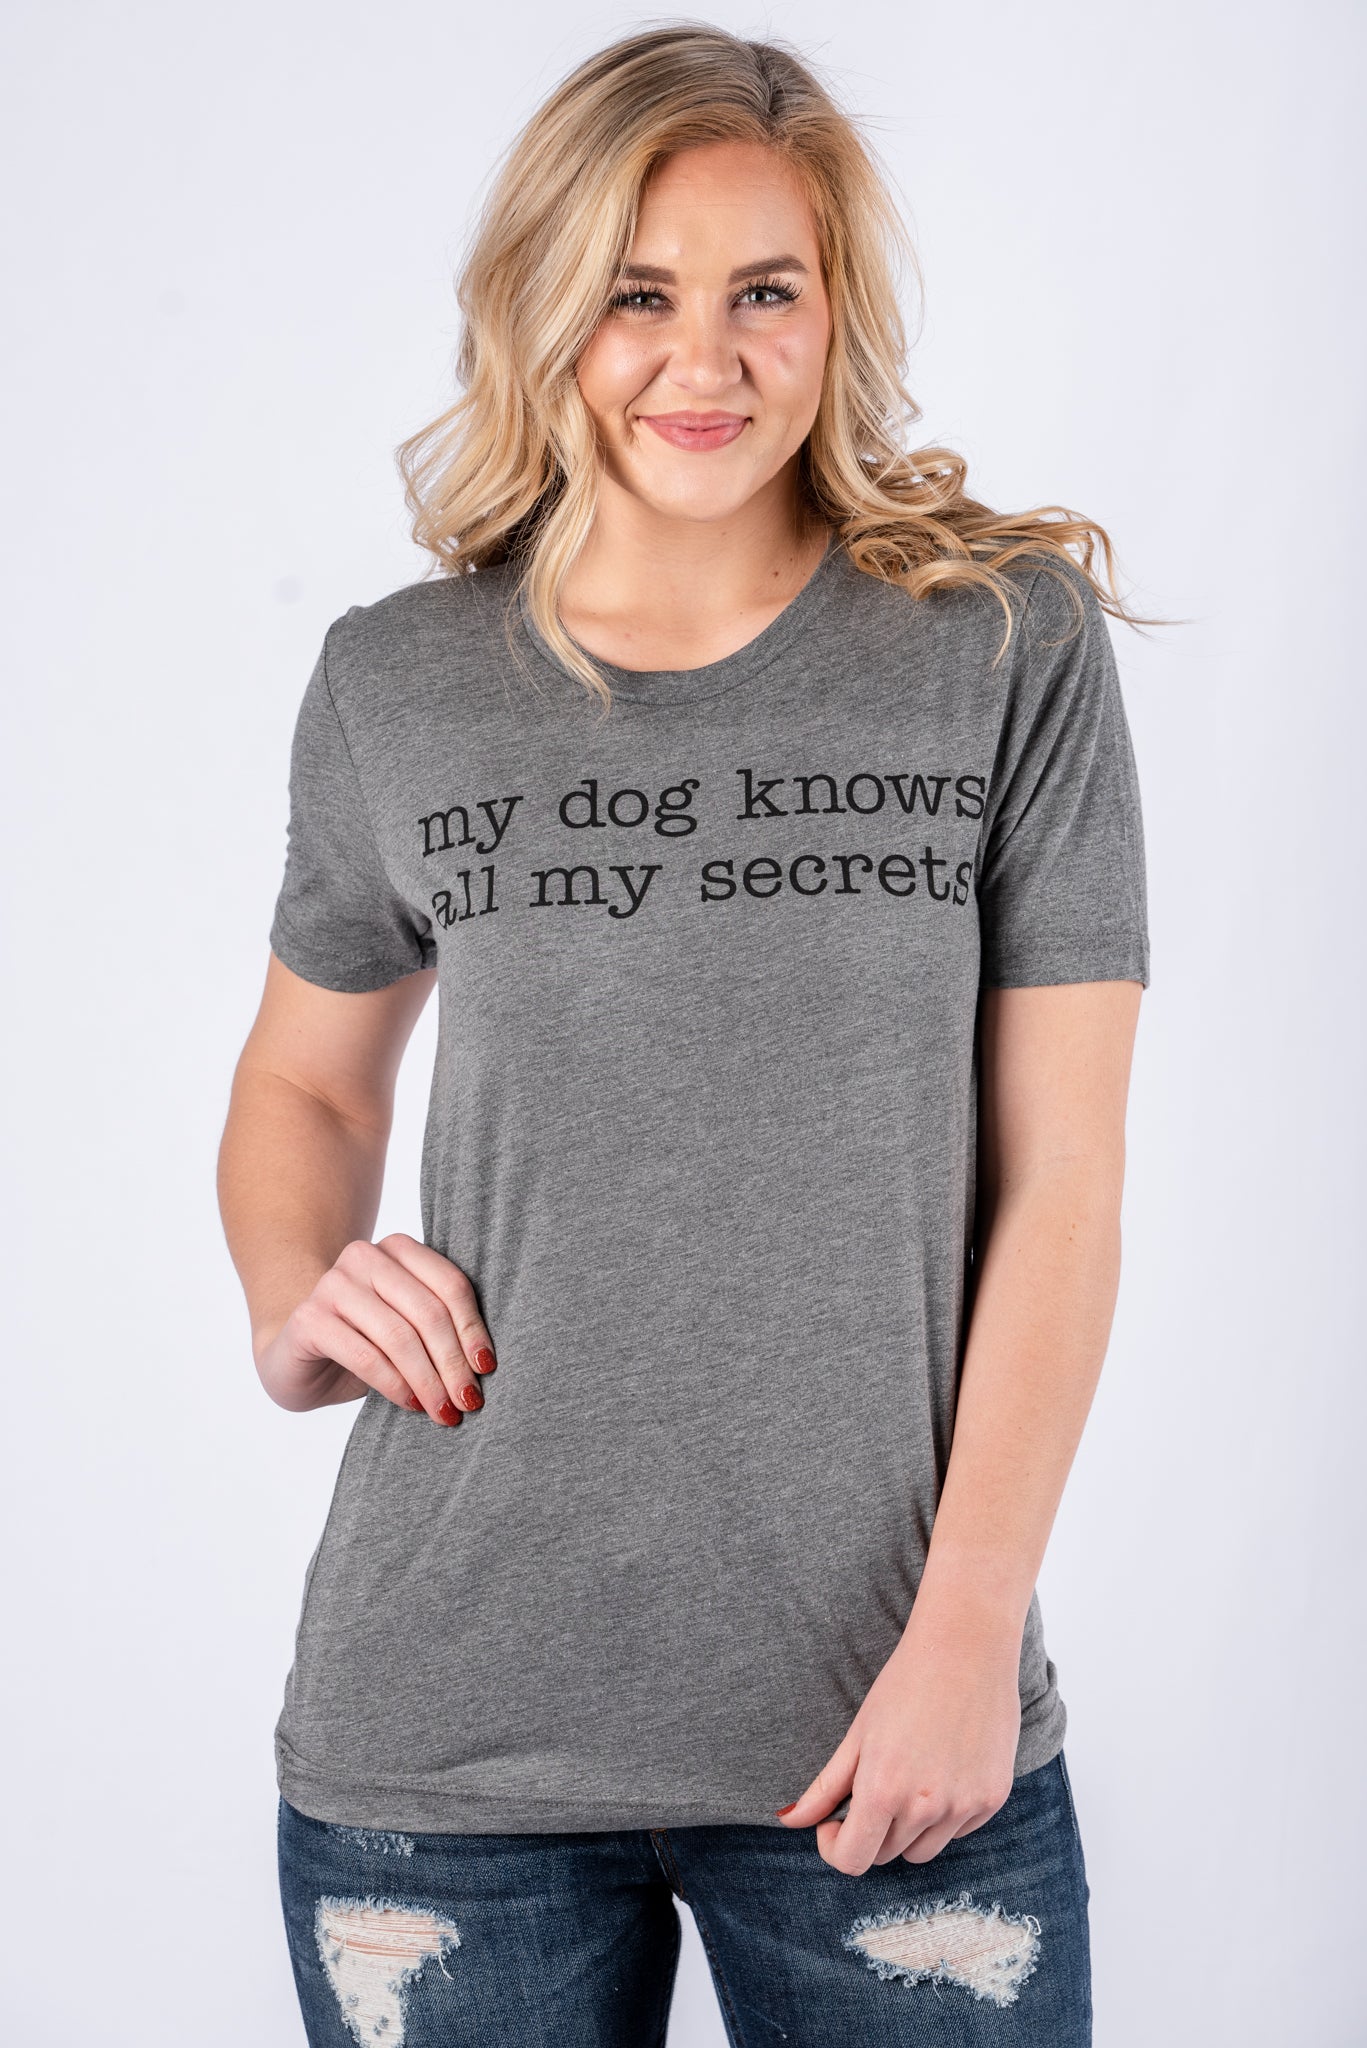 My dog knows all my secrets unisex short sleeve t-shirt grey - Stylish T-shirts - Trendy Graphic T-Shirts and Tank Tops at Lush Fashion Lounge Boutique in Oklahoma City